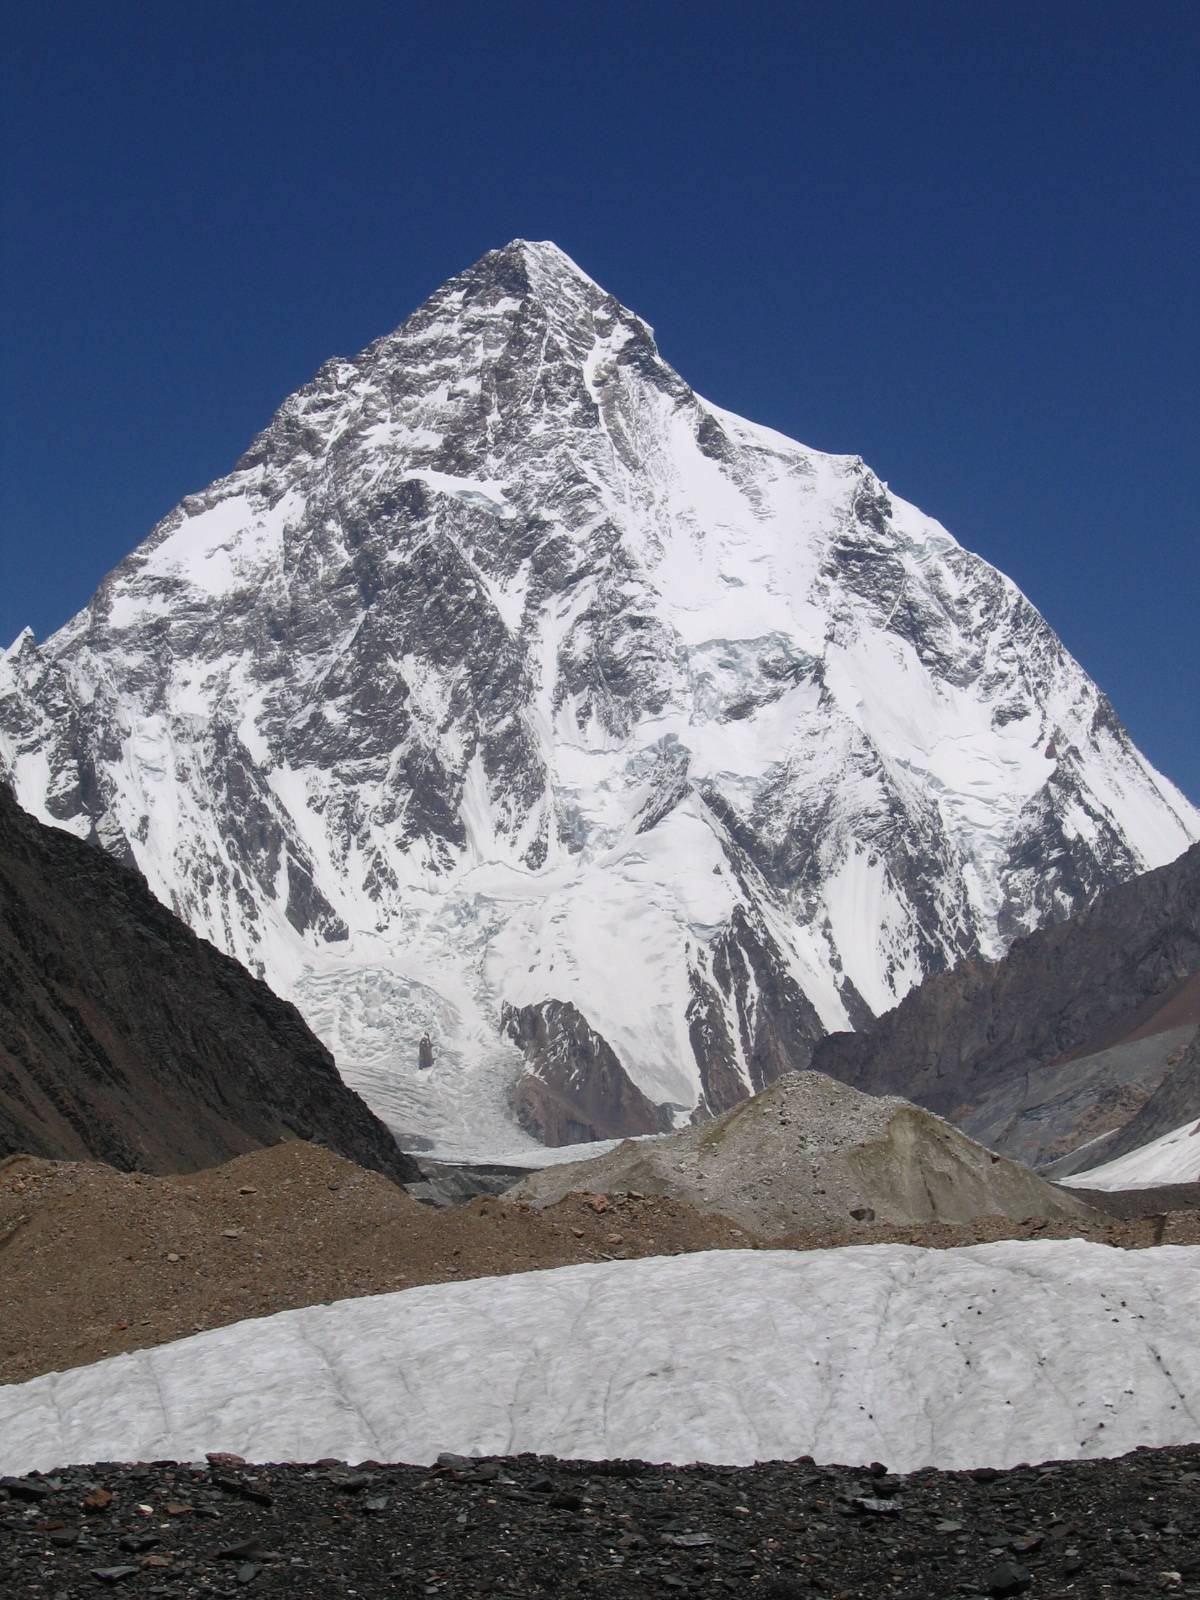 K2 (8611m) as seen in summer. The Abruzzi Spur--the route of the first ascent by Italians in 1954 and the route used for the first winter ascent on January 16, 2021, by 10 Nepali climbers--follows the right-hand skyline. [Photo] Svy123, Wikimedia Commons